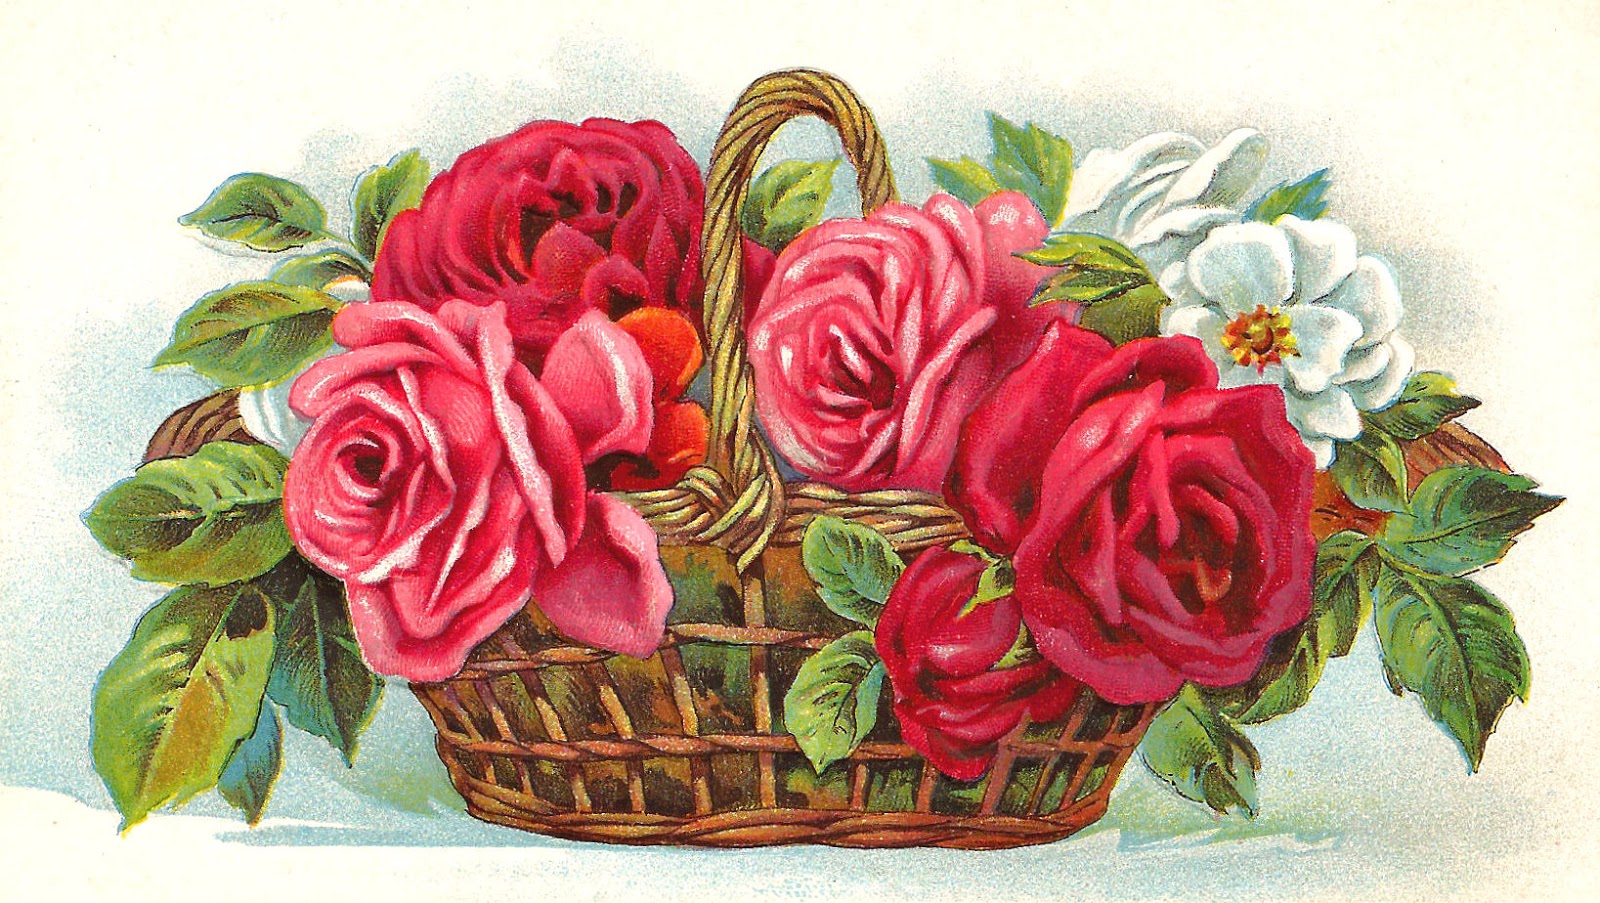 free clipart roses flowers - photo #41